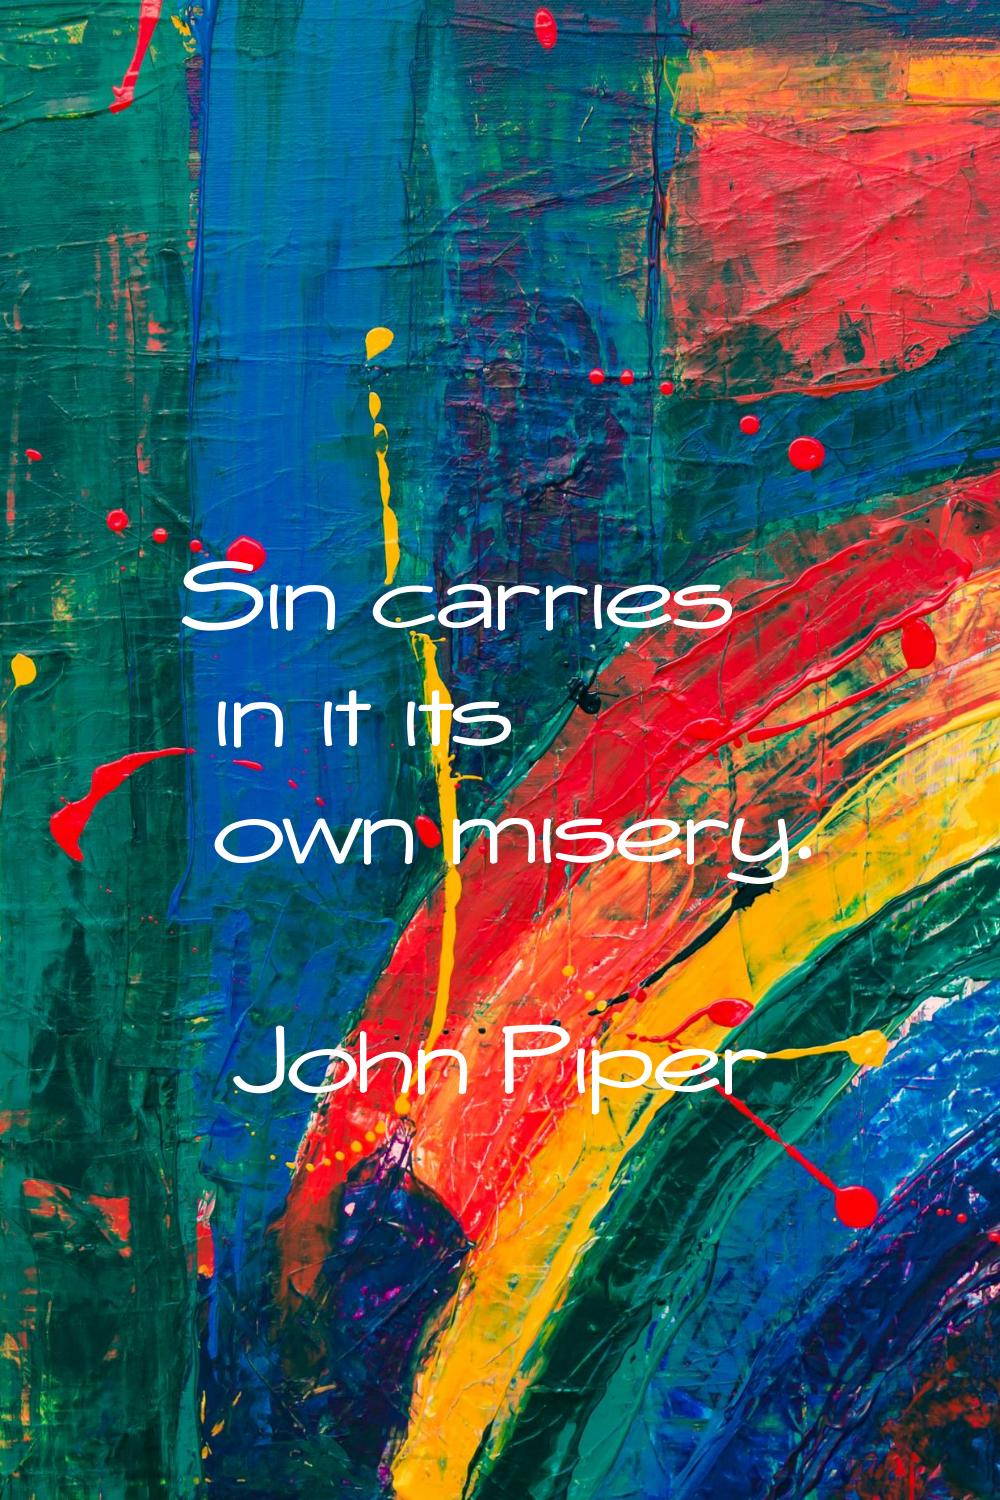 Sin carries in it its own misery.